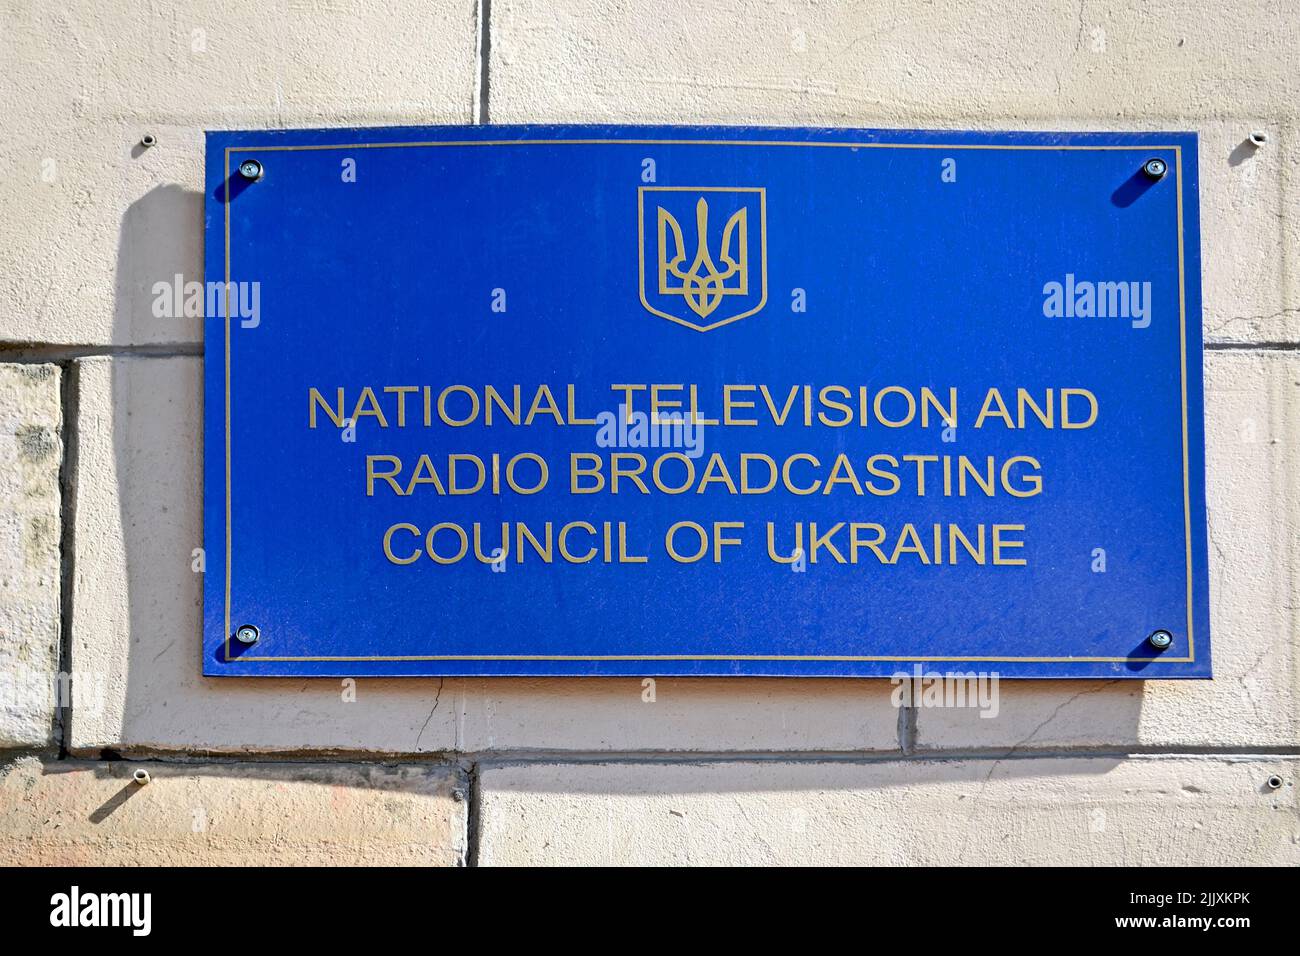 National television and radio broadcasting Council of Ukraine in Kiev, Ukraine.  It was created in 1993. Stock Photo